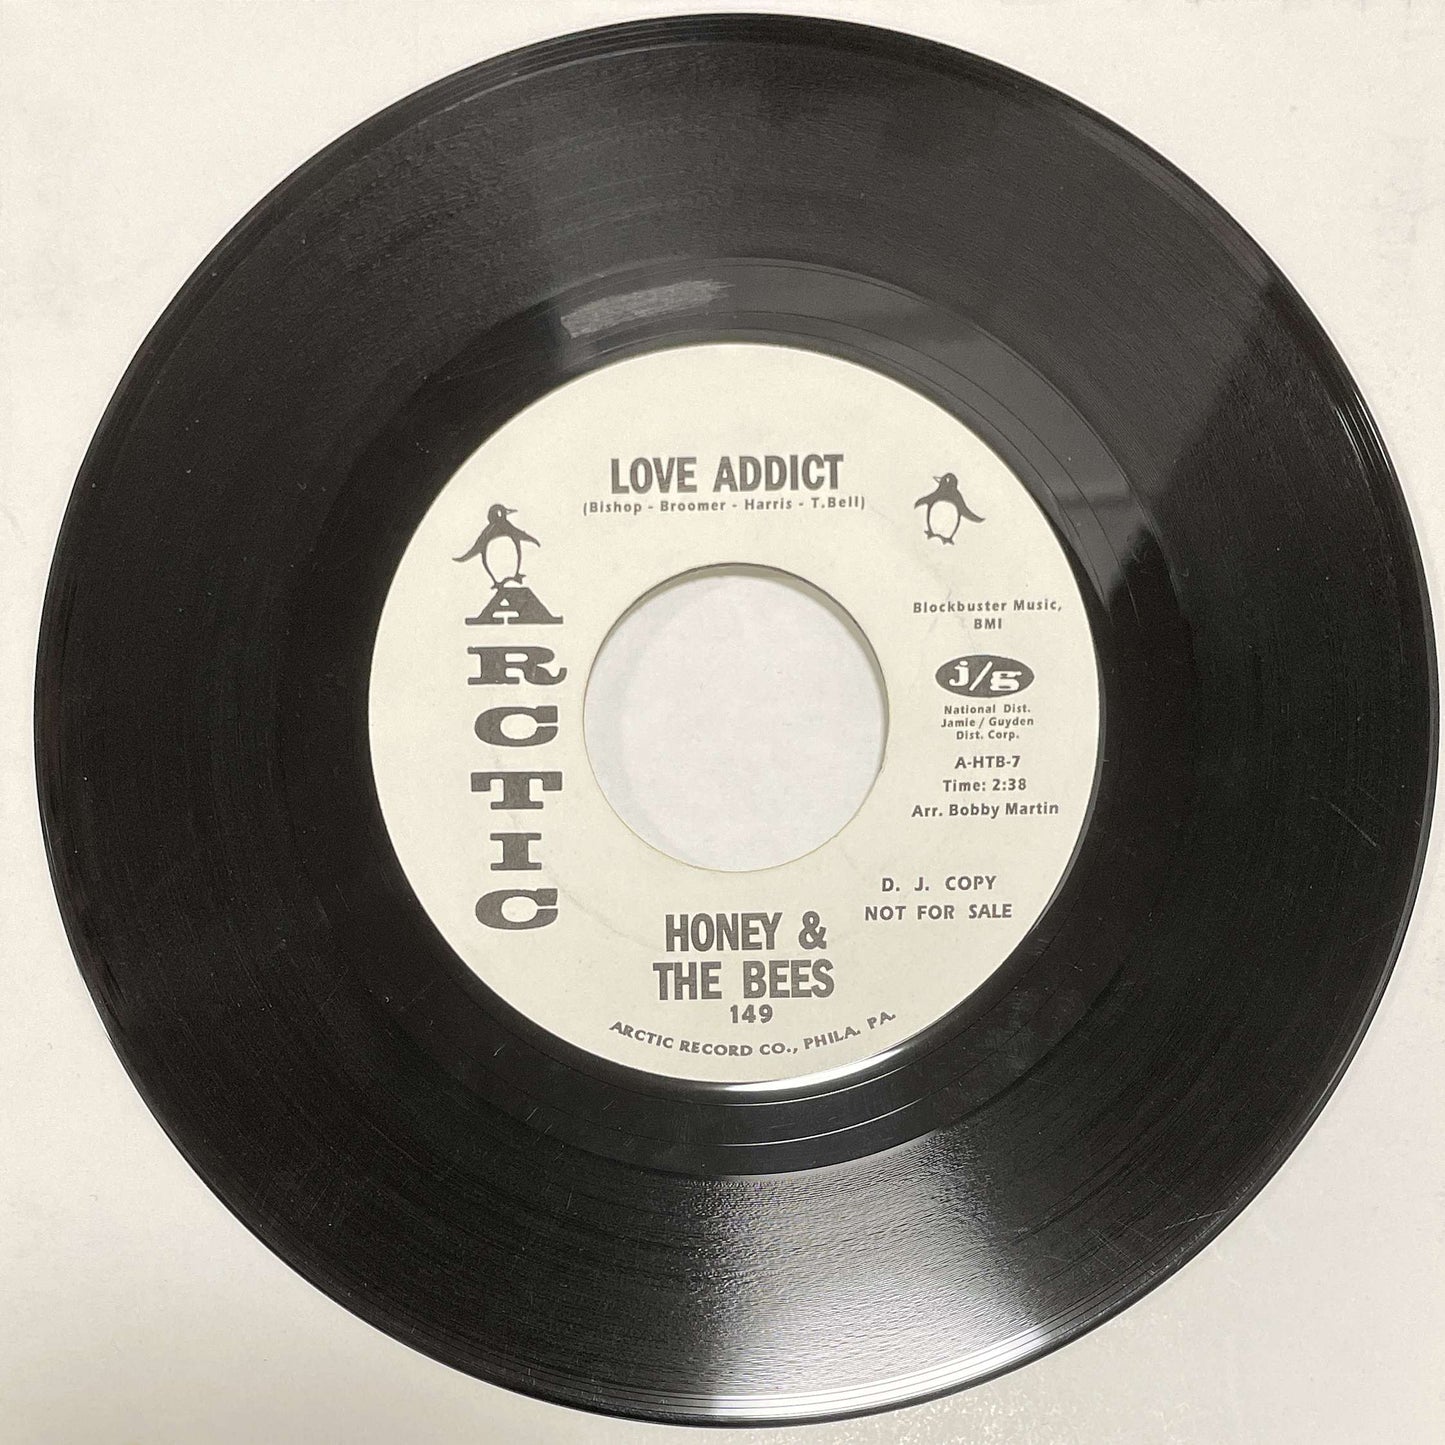 Honey & The Bees – Love Addict / Dynamite Exploded ( ARCTIC ) 45